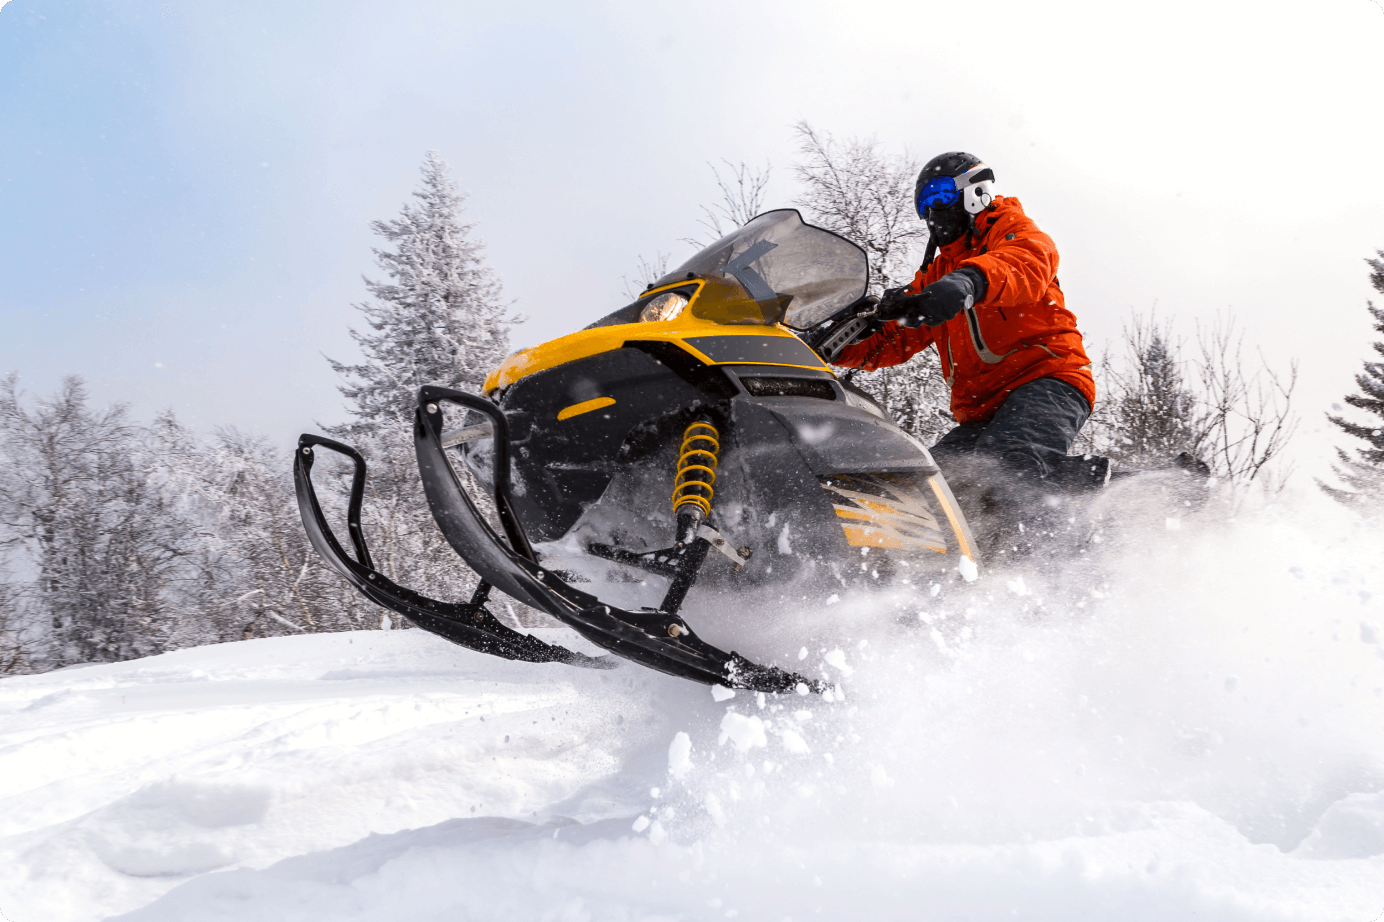 A snowmobile go over a snow mound at speed